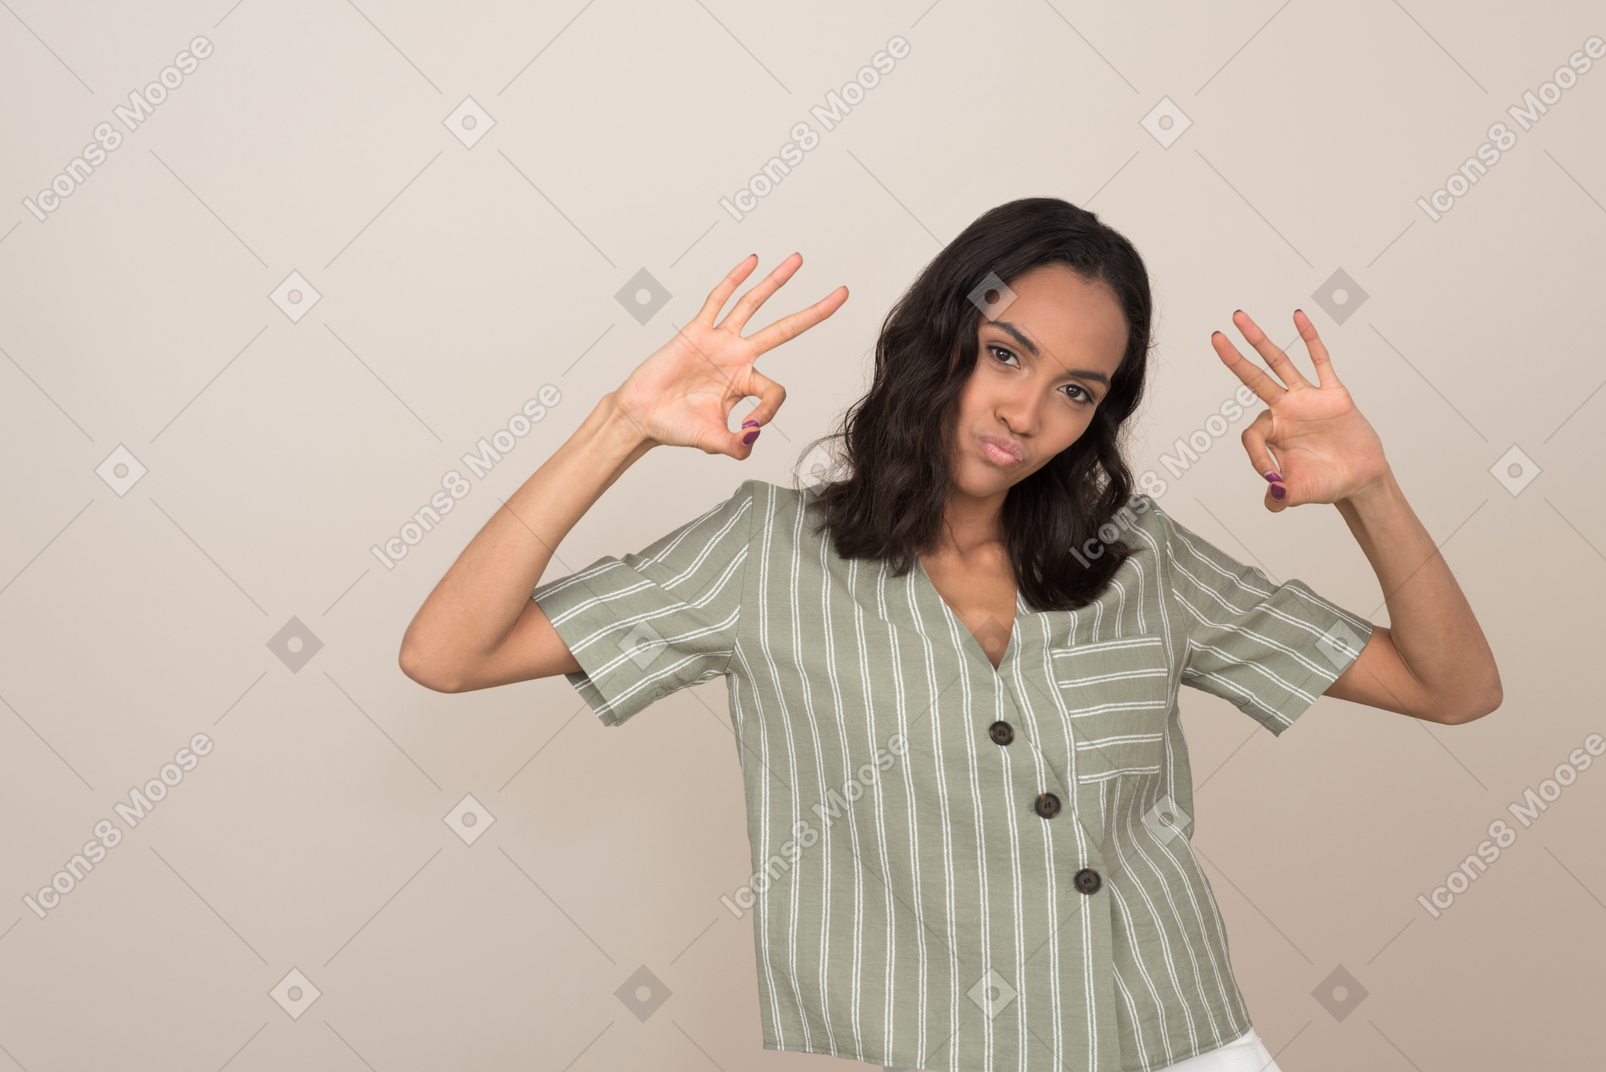 Attractive young girl showing ok sign with both hands